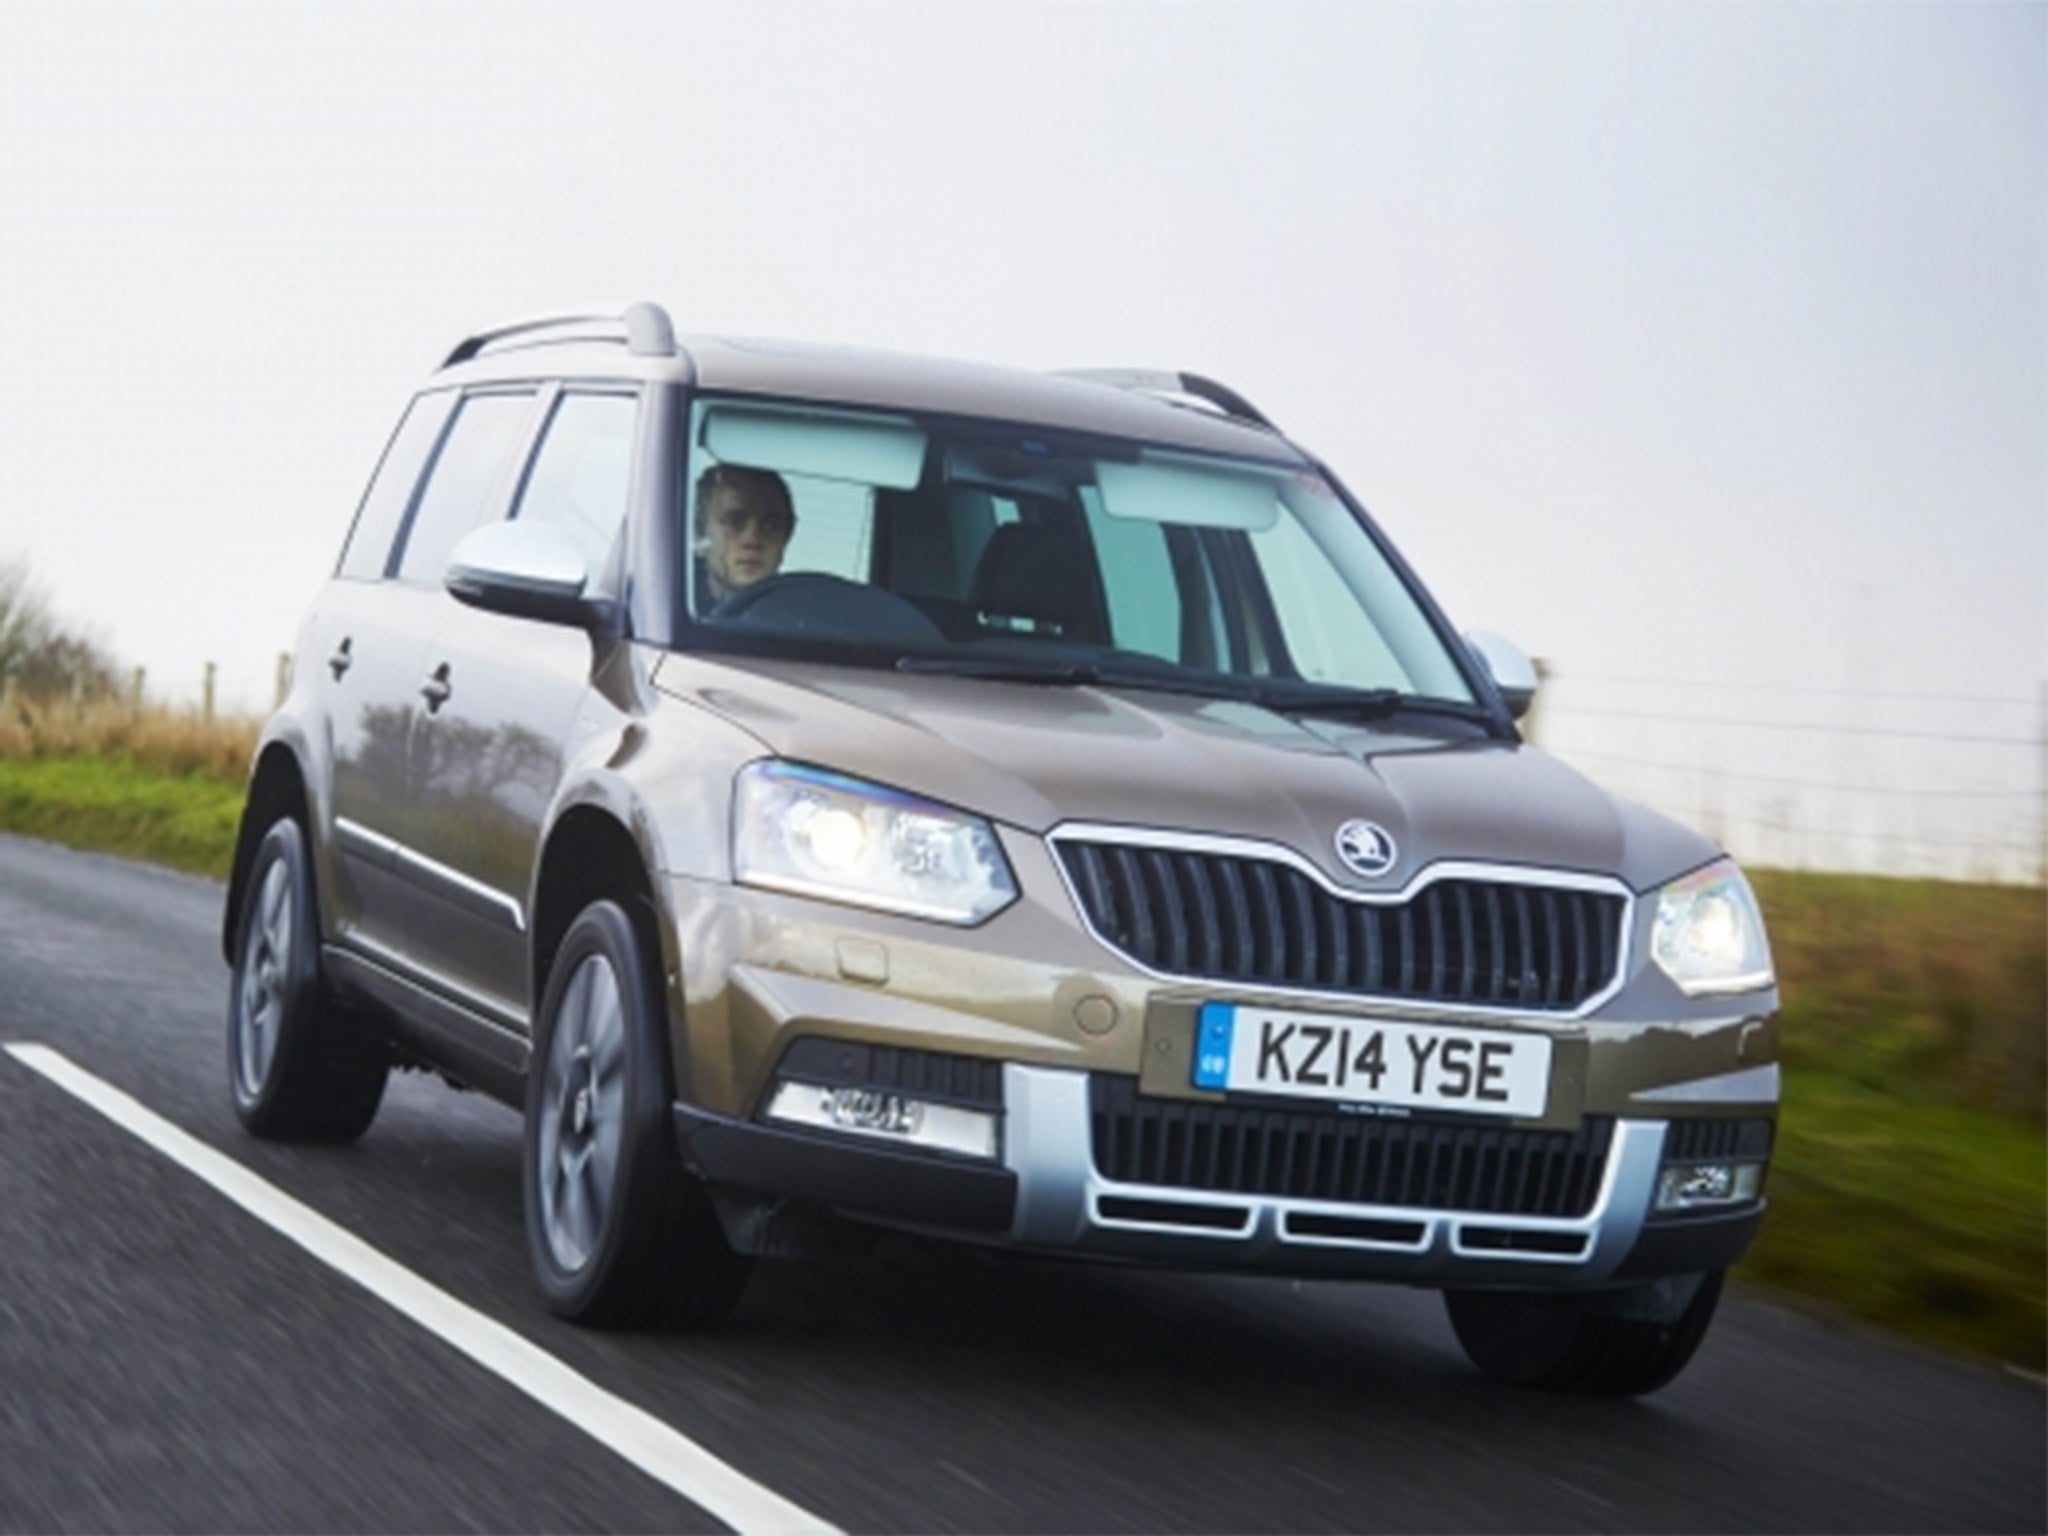 The new Skoda Yeti: Over-priced? Or a cut-price rival to Land Rover?